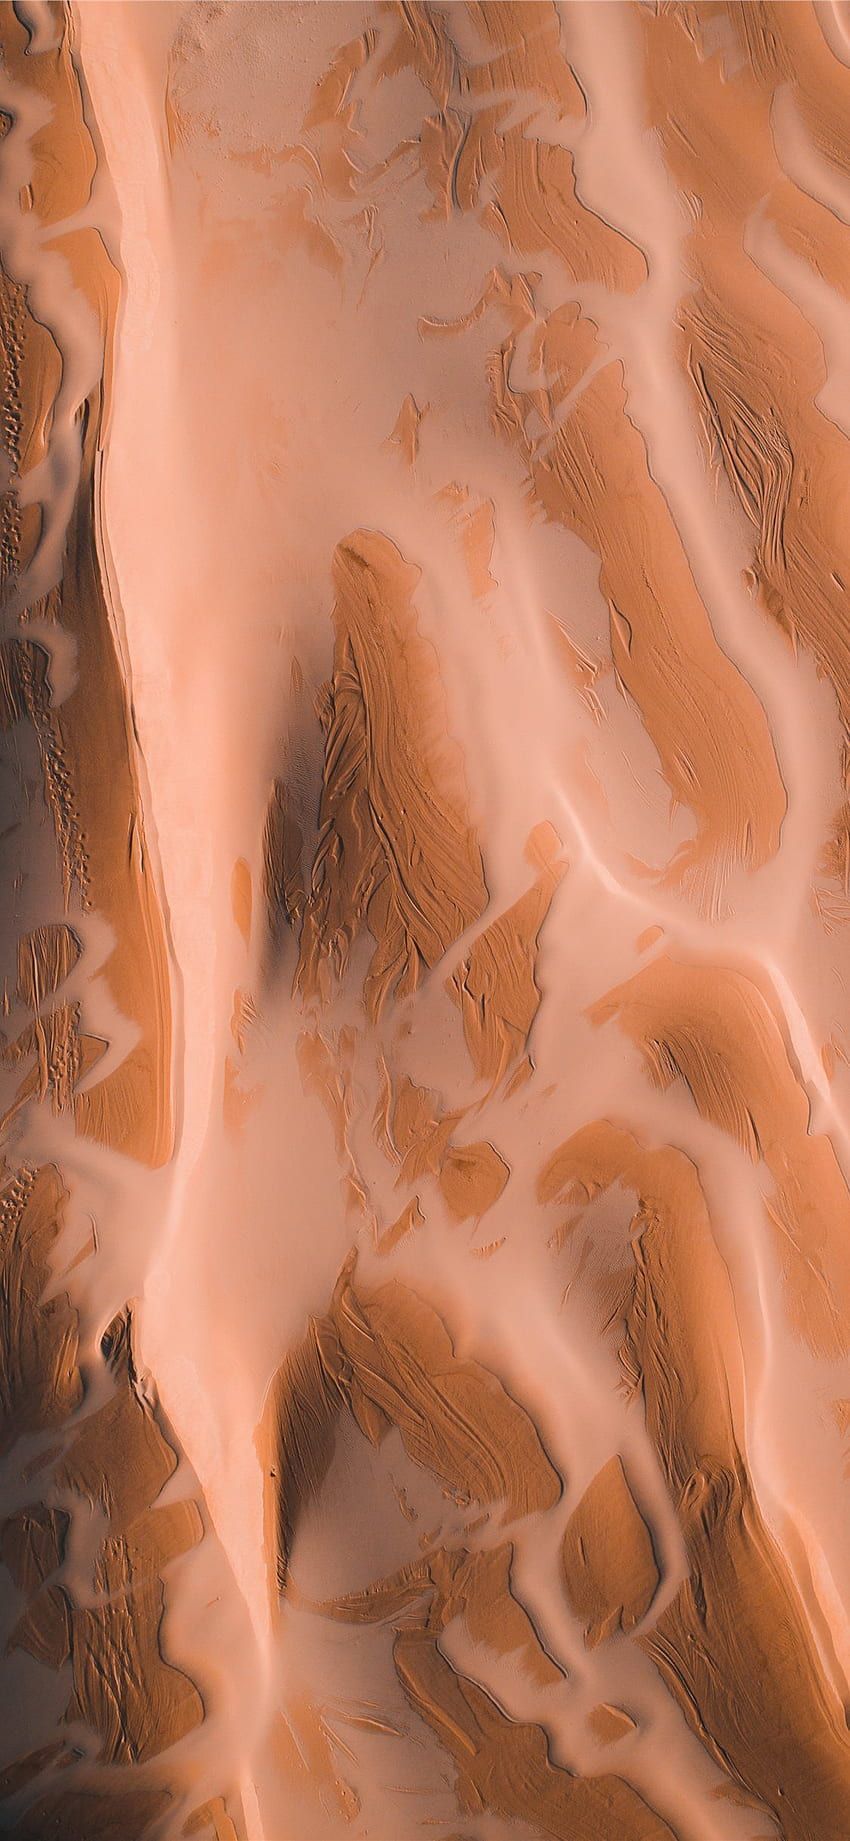 An abstract image of a desert with sand dunes and valleys. - Mars